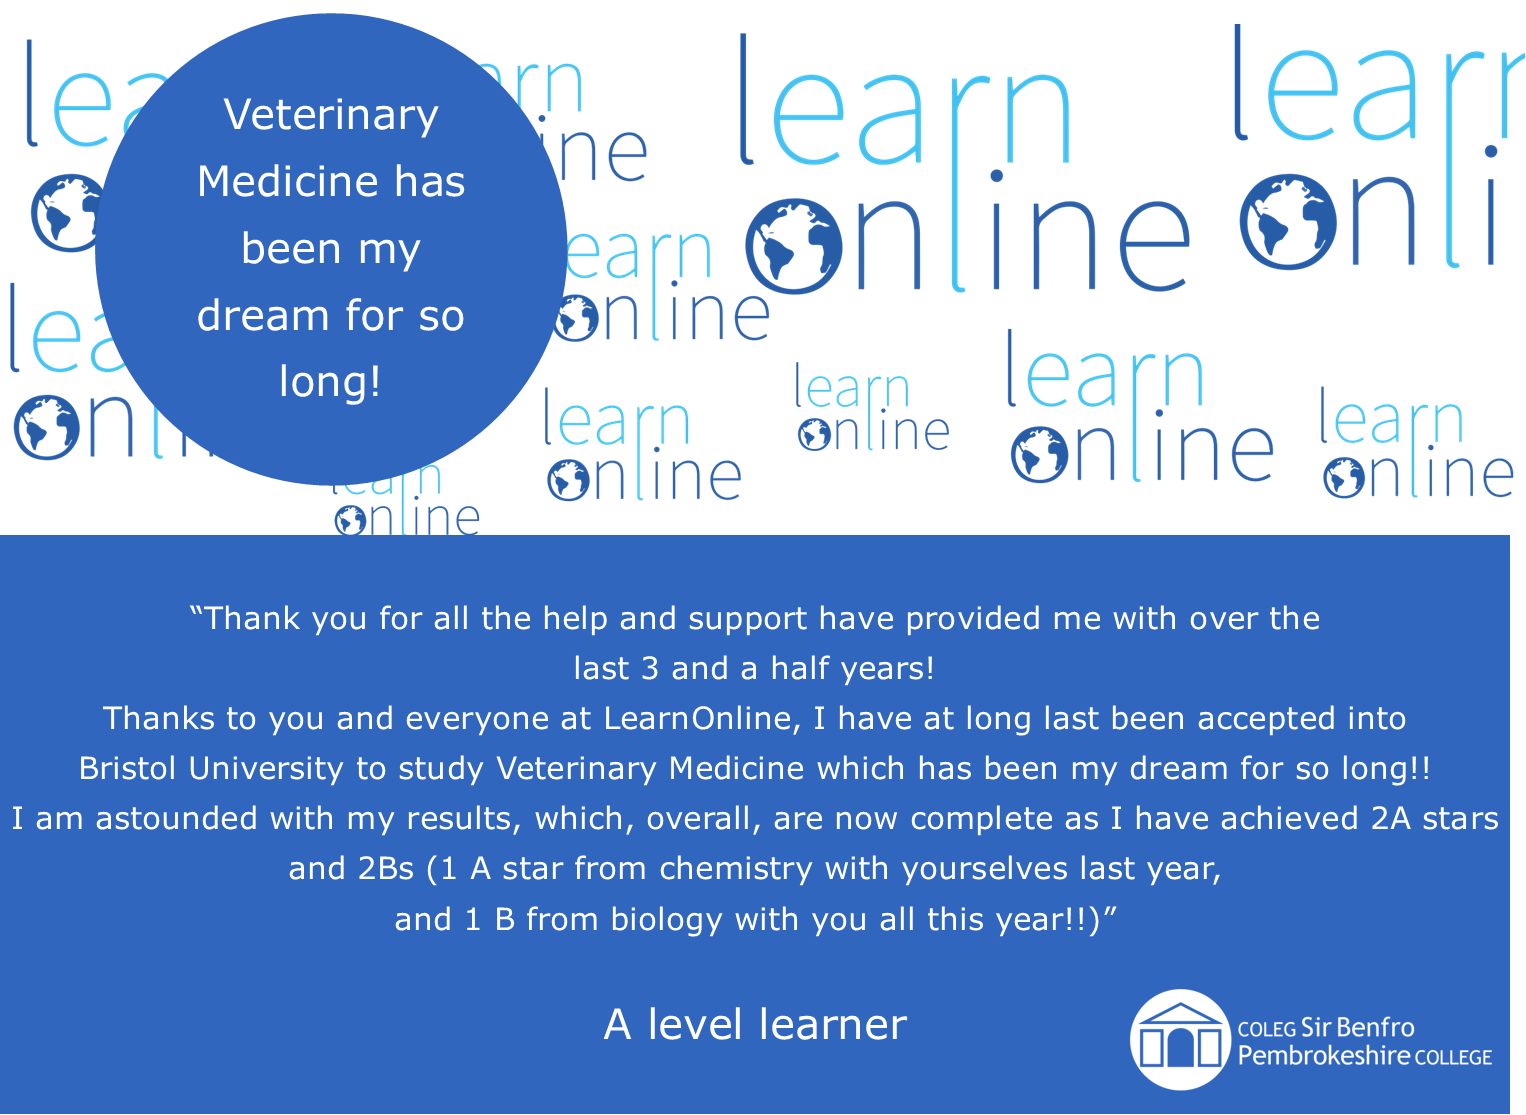 LearnOnline testimonial 'Veterinary Medicine has been my dream for so long!' “Thank you for all the help and support have provided me with over the last 3 and a half years! Thanks to you and everyone at LearnOnline, I have at long last been accepted into Bristol University to study Veterinary Medicine which has been my dream for so long!! I am astounded with my results, which, overall, are now complete as I have achieved 2A stars and 2Bs (1 A star from chemistry with yourselves last year, and 1 B from biology with you all this year!!)” A level learner